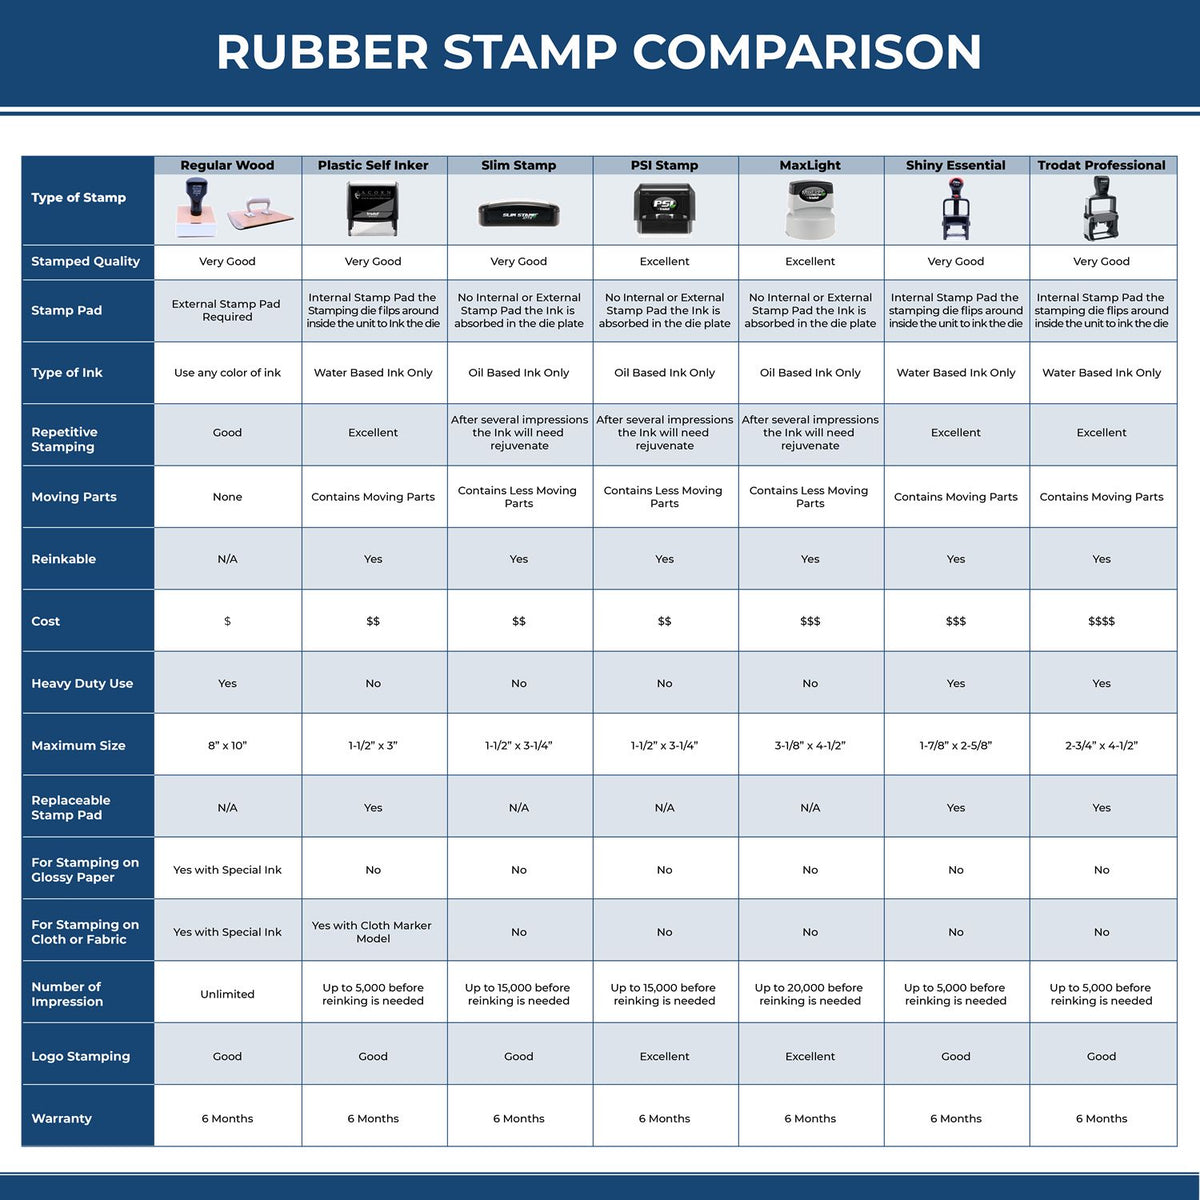 Large Self-Inking Narrow Font File Copy Stamp 4866S Rubber Stamp Comparison